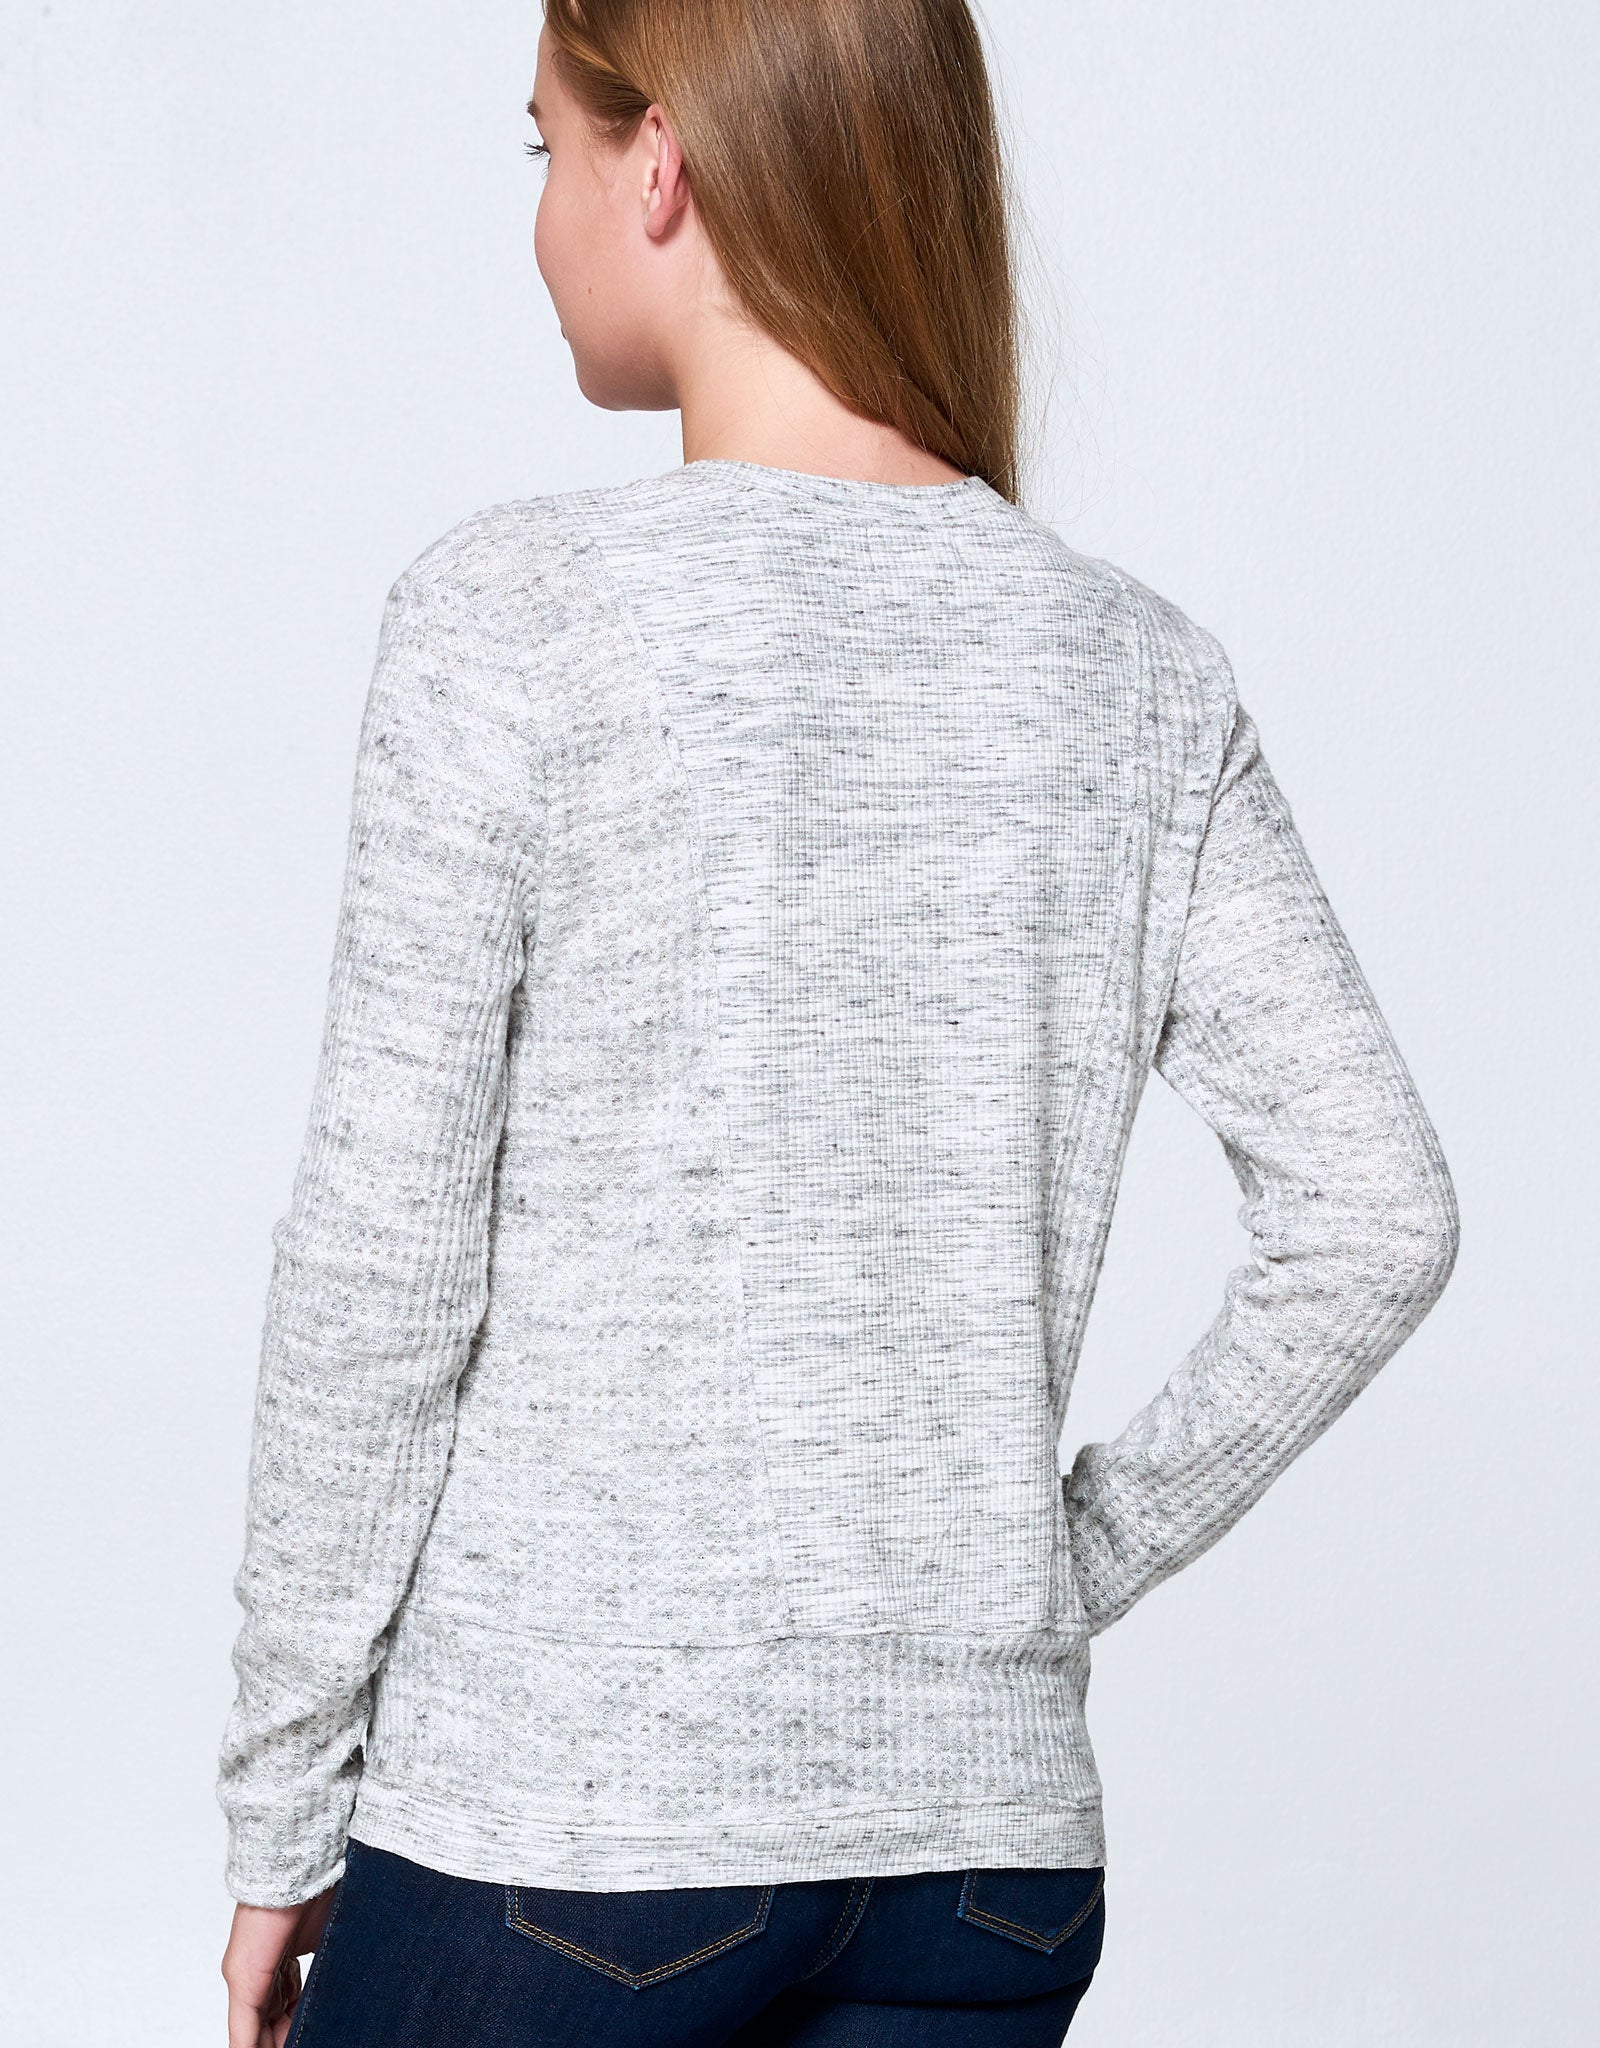 Waffle Knit Top | Heather Grey - 4OUR Dreamers